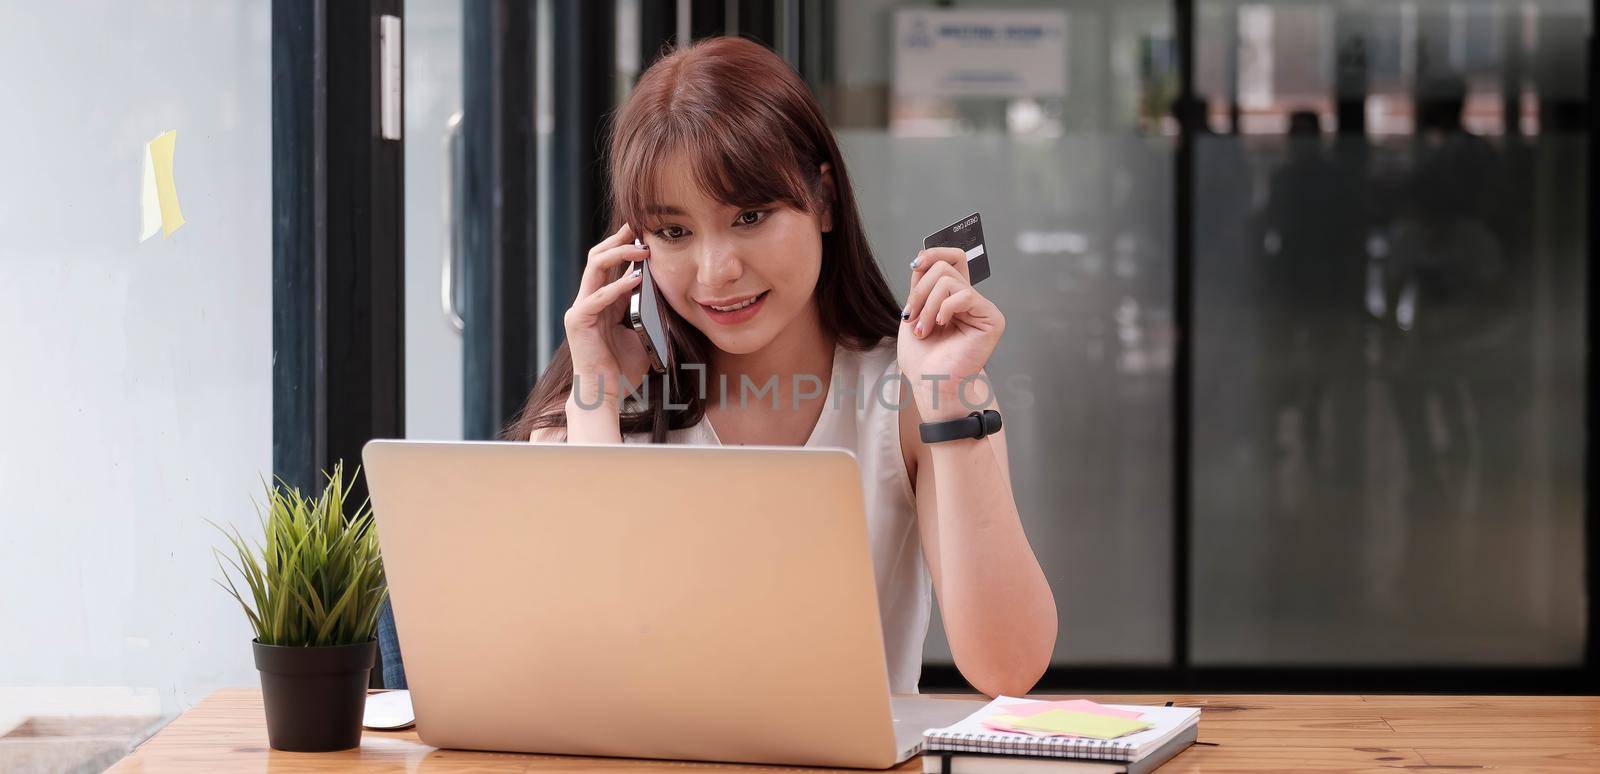 Smiling woman sitting office talking on mobile phone making online payment on her tablet computer.